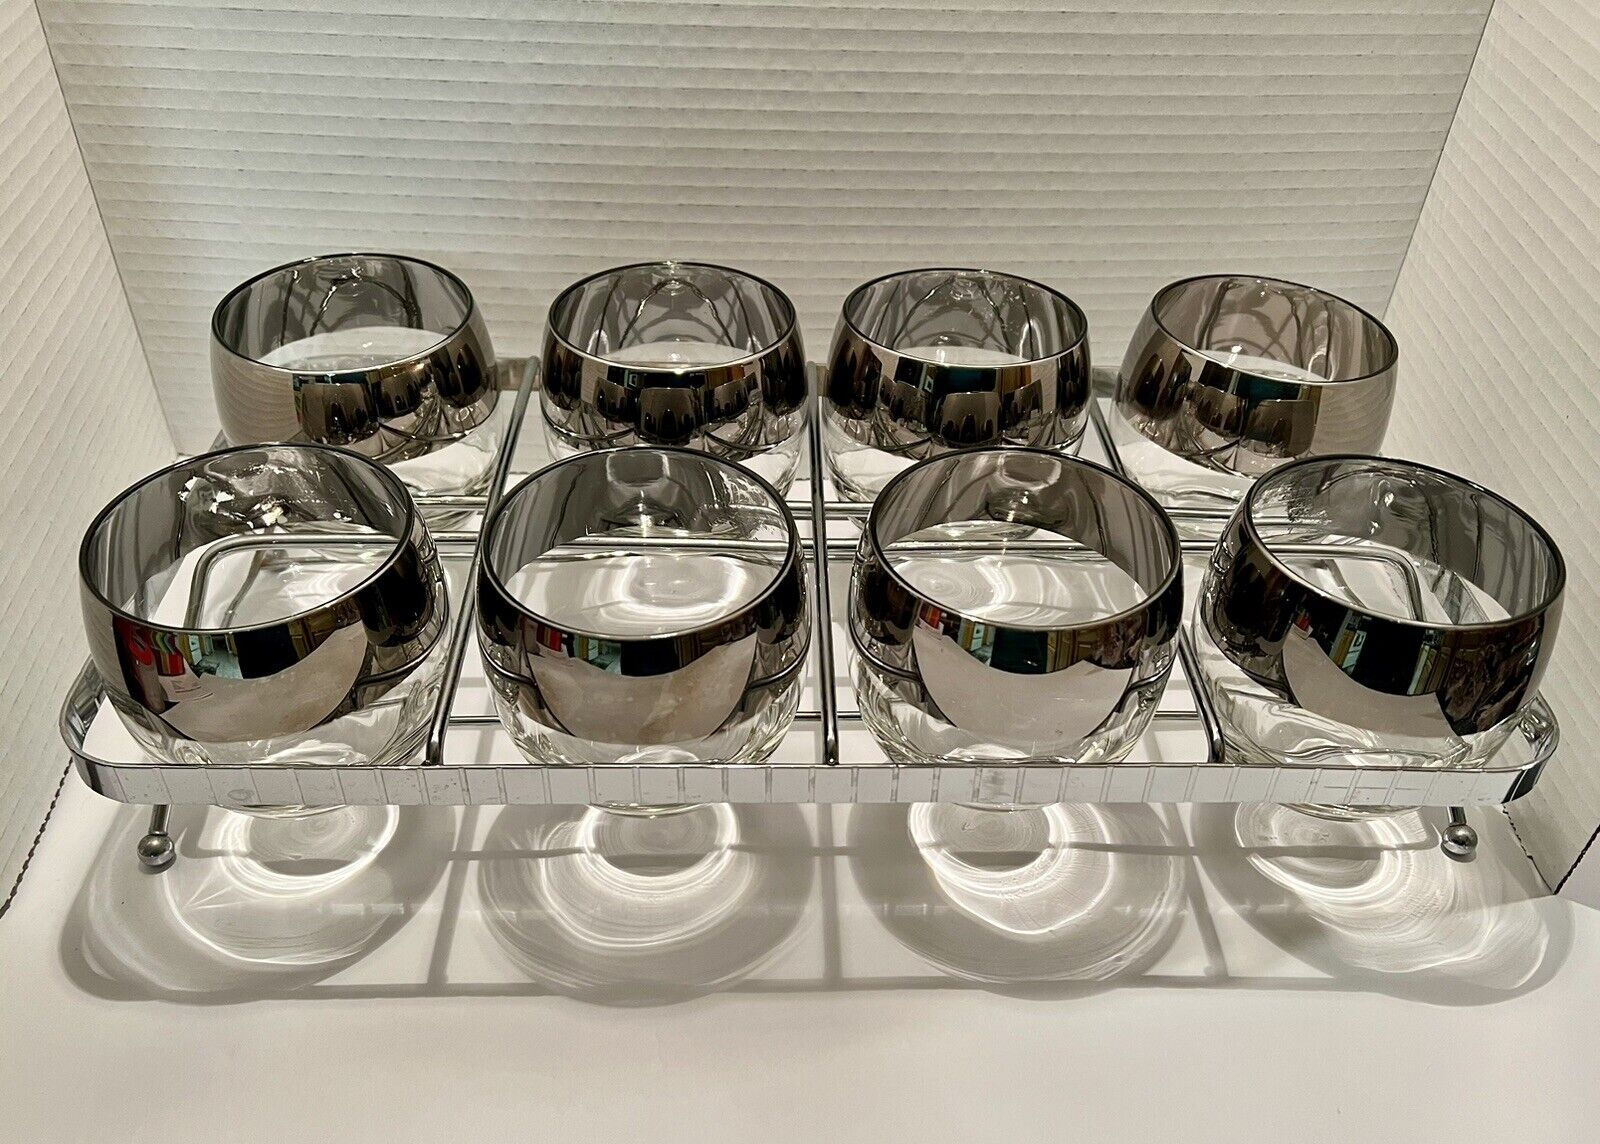 Vitreon Queens Luster Chrome Beverage Set, Vintage, Beautiful, Any Occasion